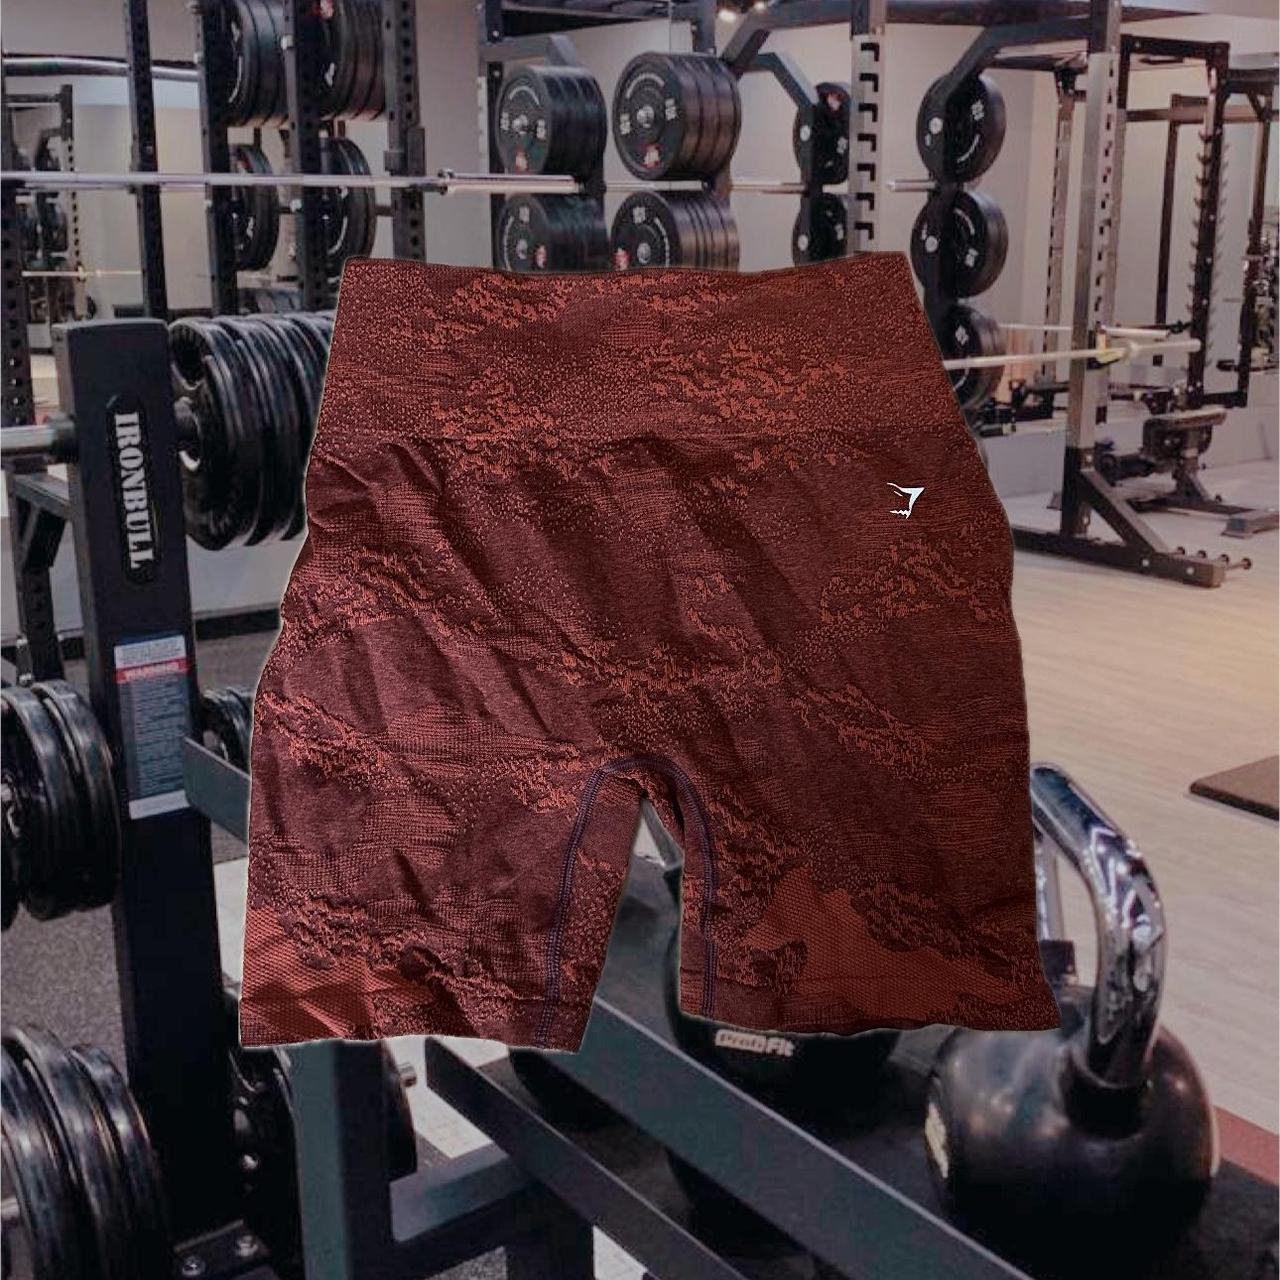 Gymshark Adapt Camo Seamless Shorts - Storm Red/Cherry Brown